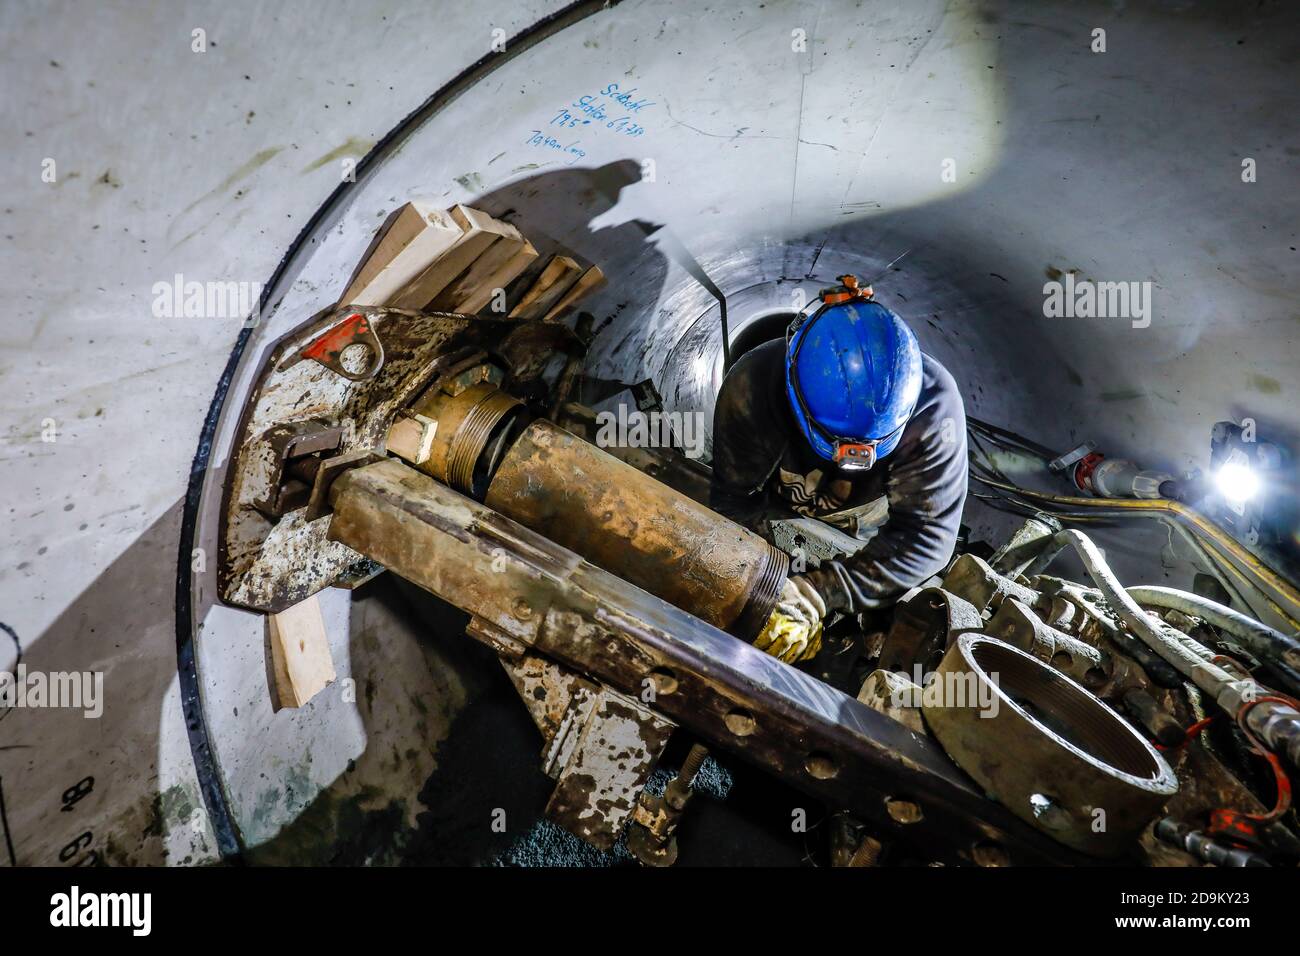 Essen, Ruhr area, North Rhine-Westphalia, Germany, house connection drillings from a newly laid sewer pipe. Stock Photo